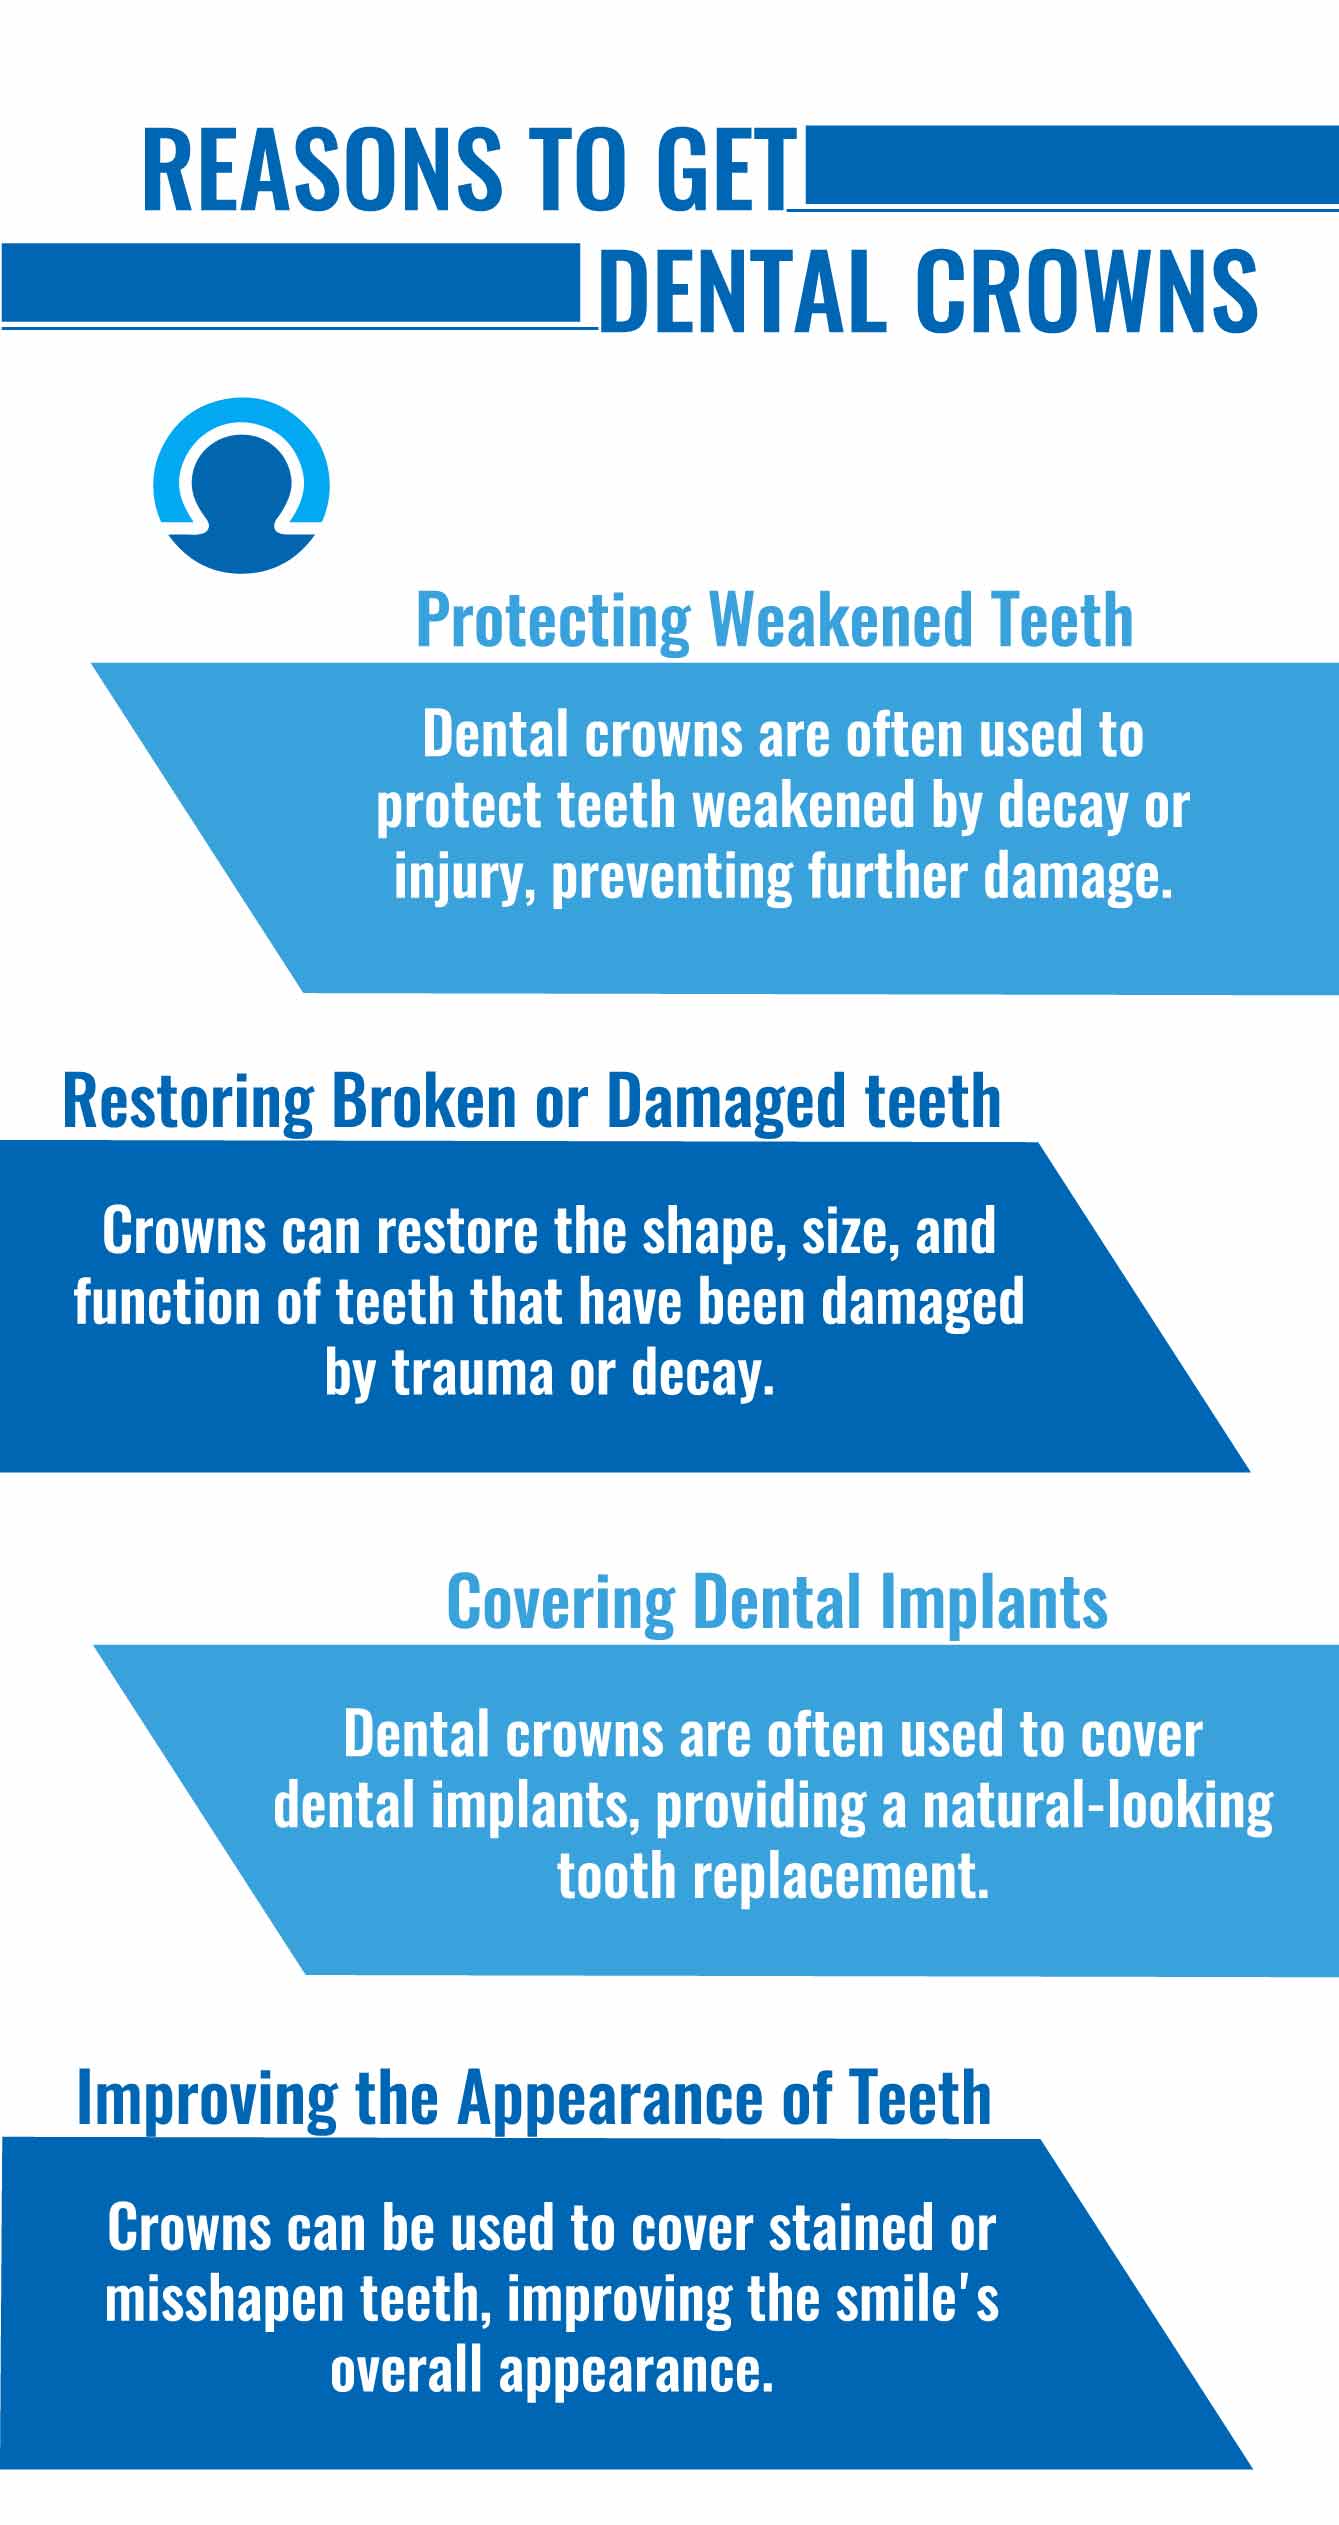 Reasons to Get Dental Crowns in Houston, Texas